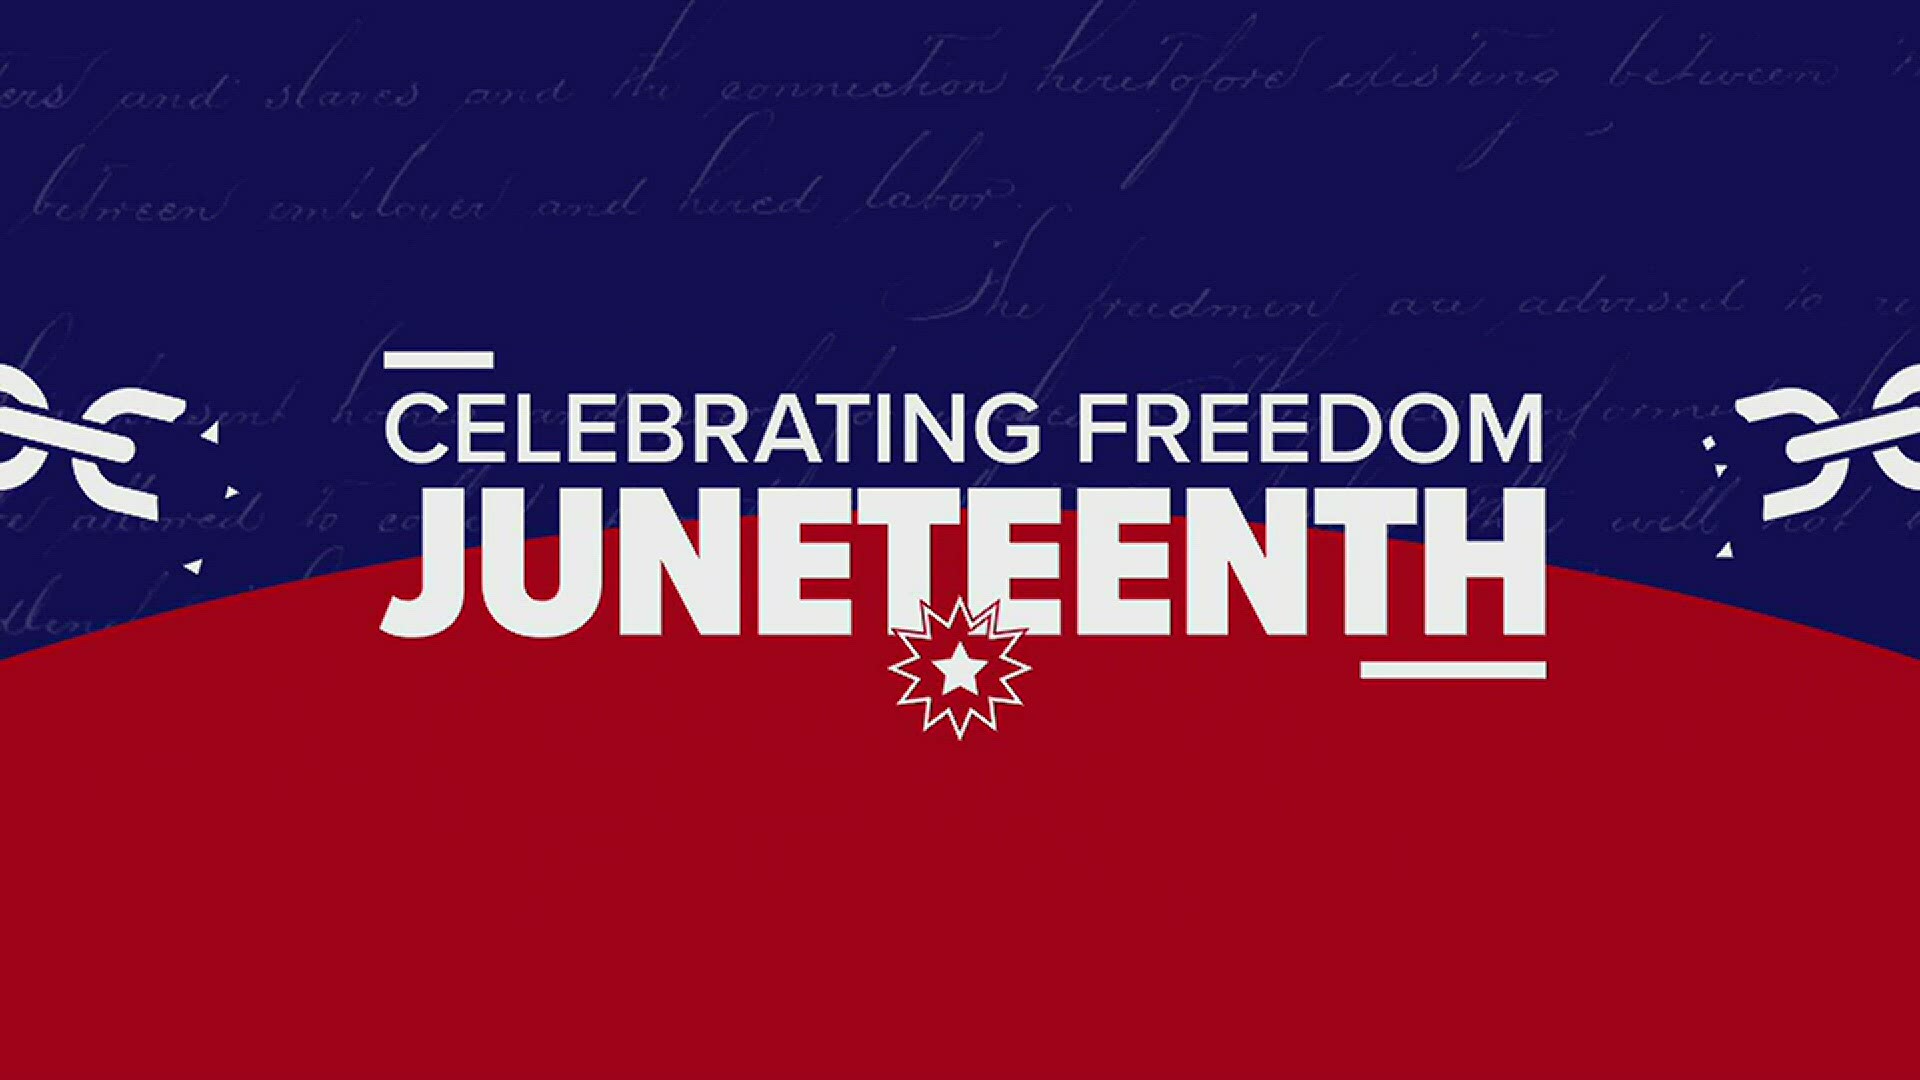 Race and culture expert Dr. Rosemarie Allen discusses the history of Juneteenth, the nation's newest federal holiday.